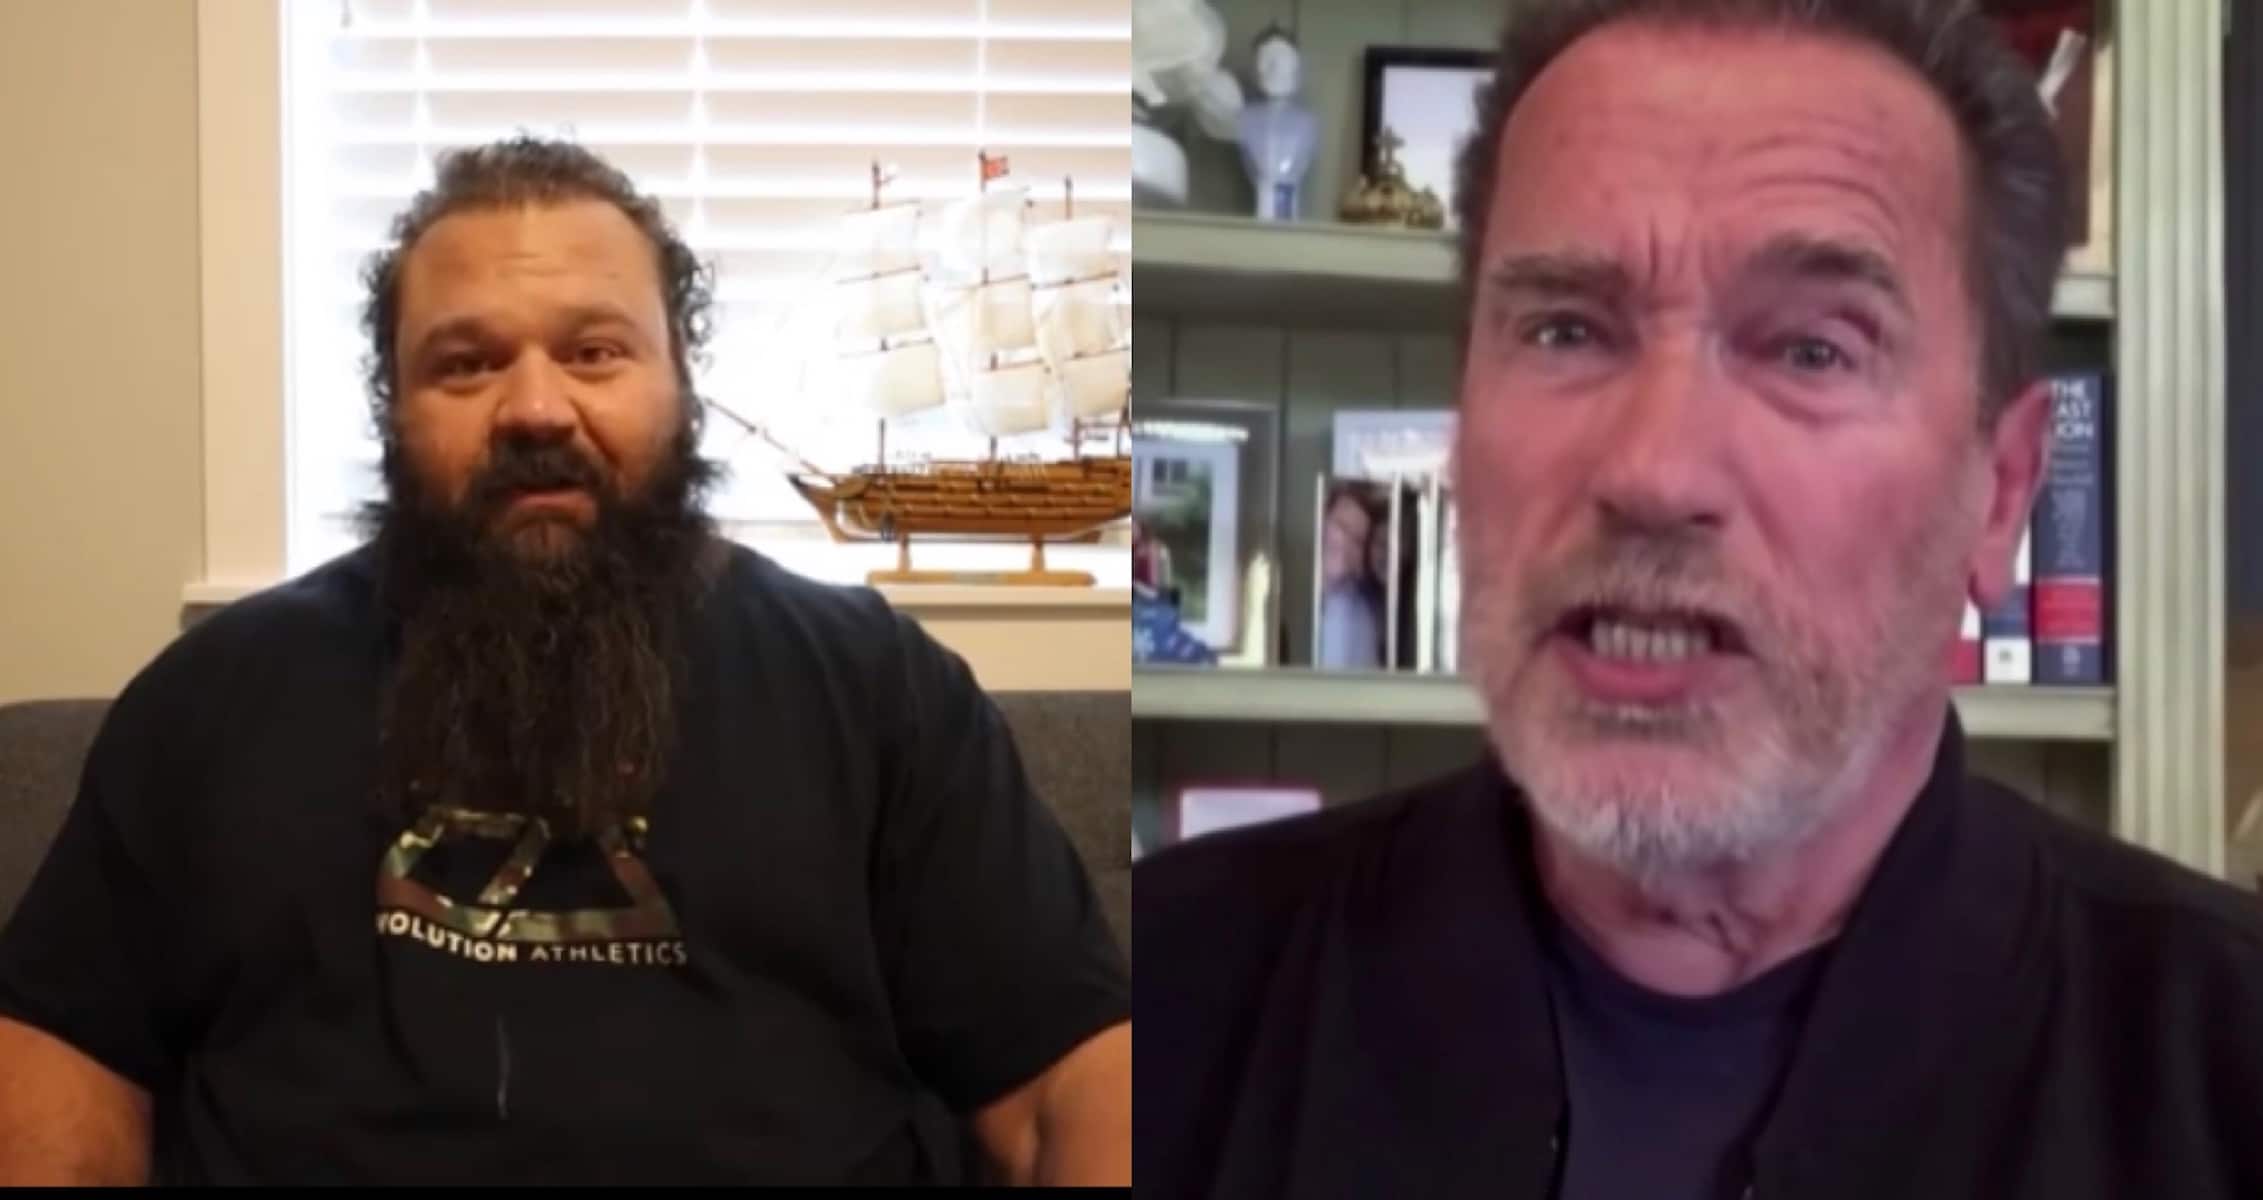 Robert Oberst Responds To Comments Made By Arnold Schwarzenegger